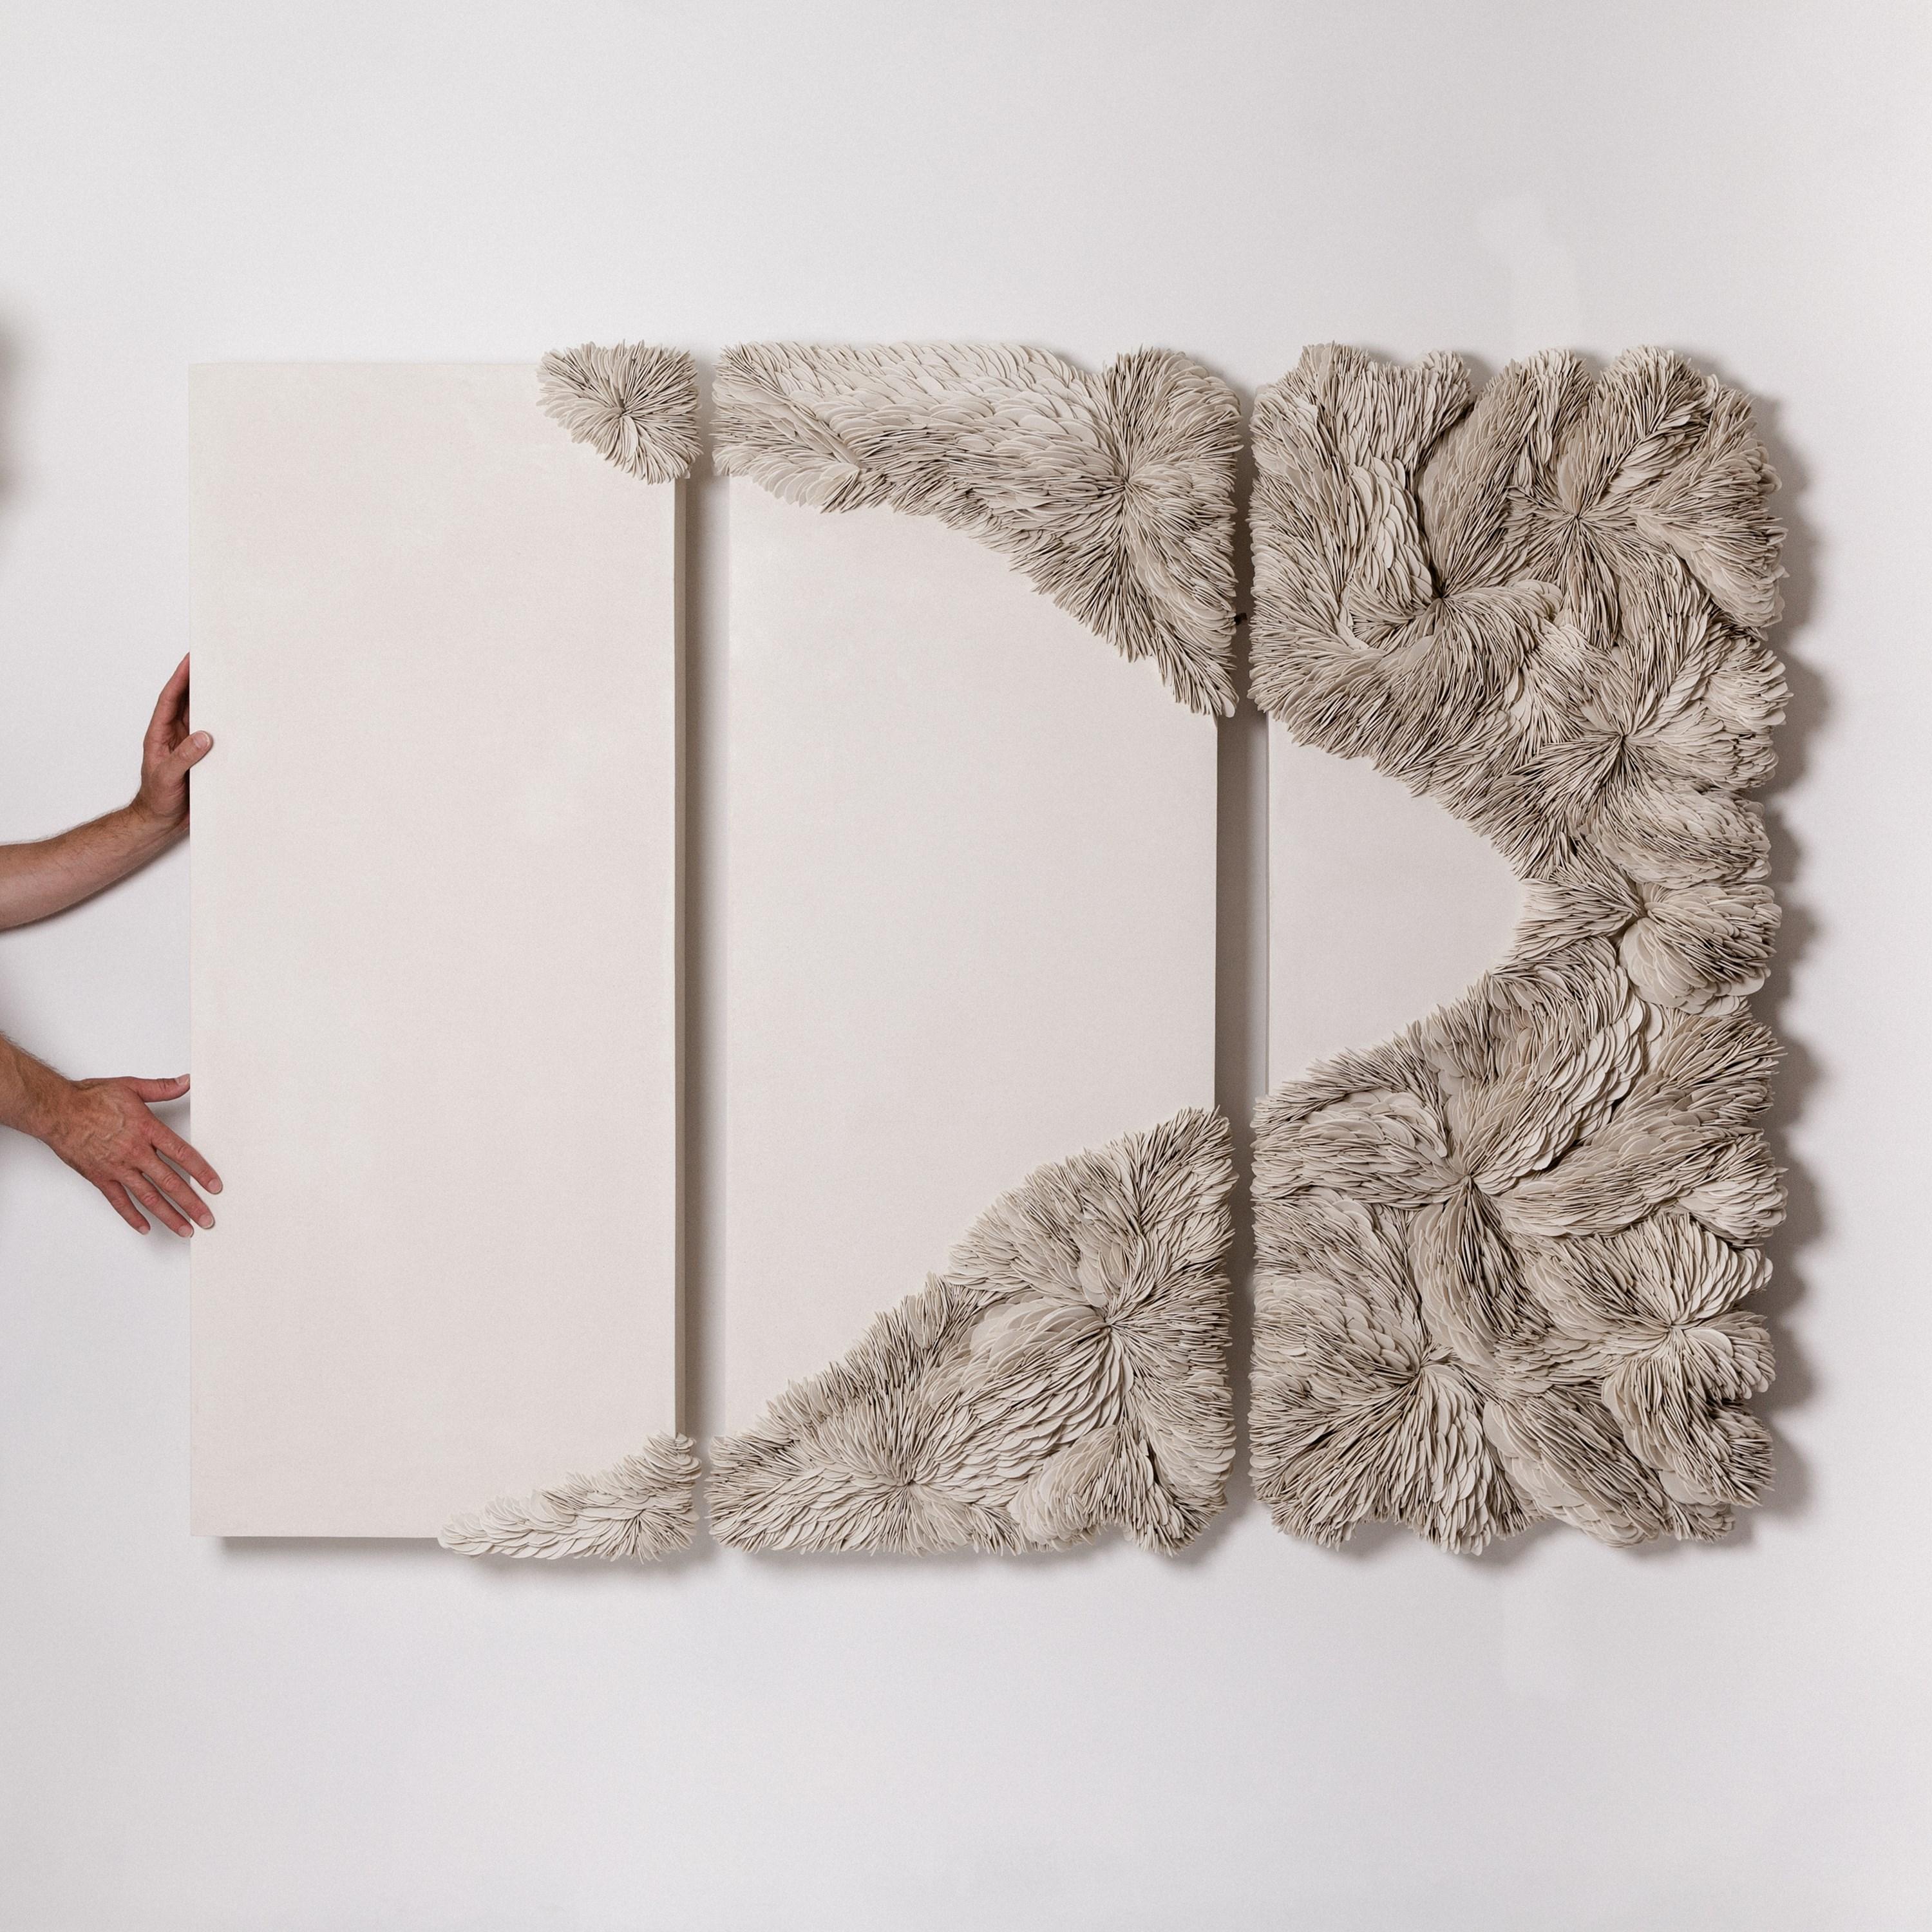 British Collapsed Triptych in Sand, porcelain & plaster wall artwork by Olivia Walker For Sale